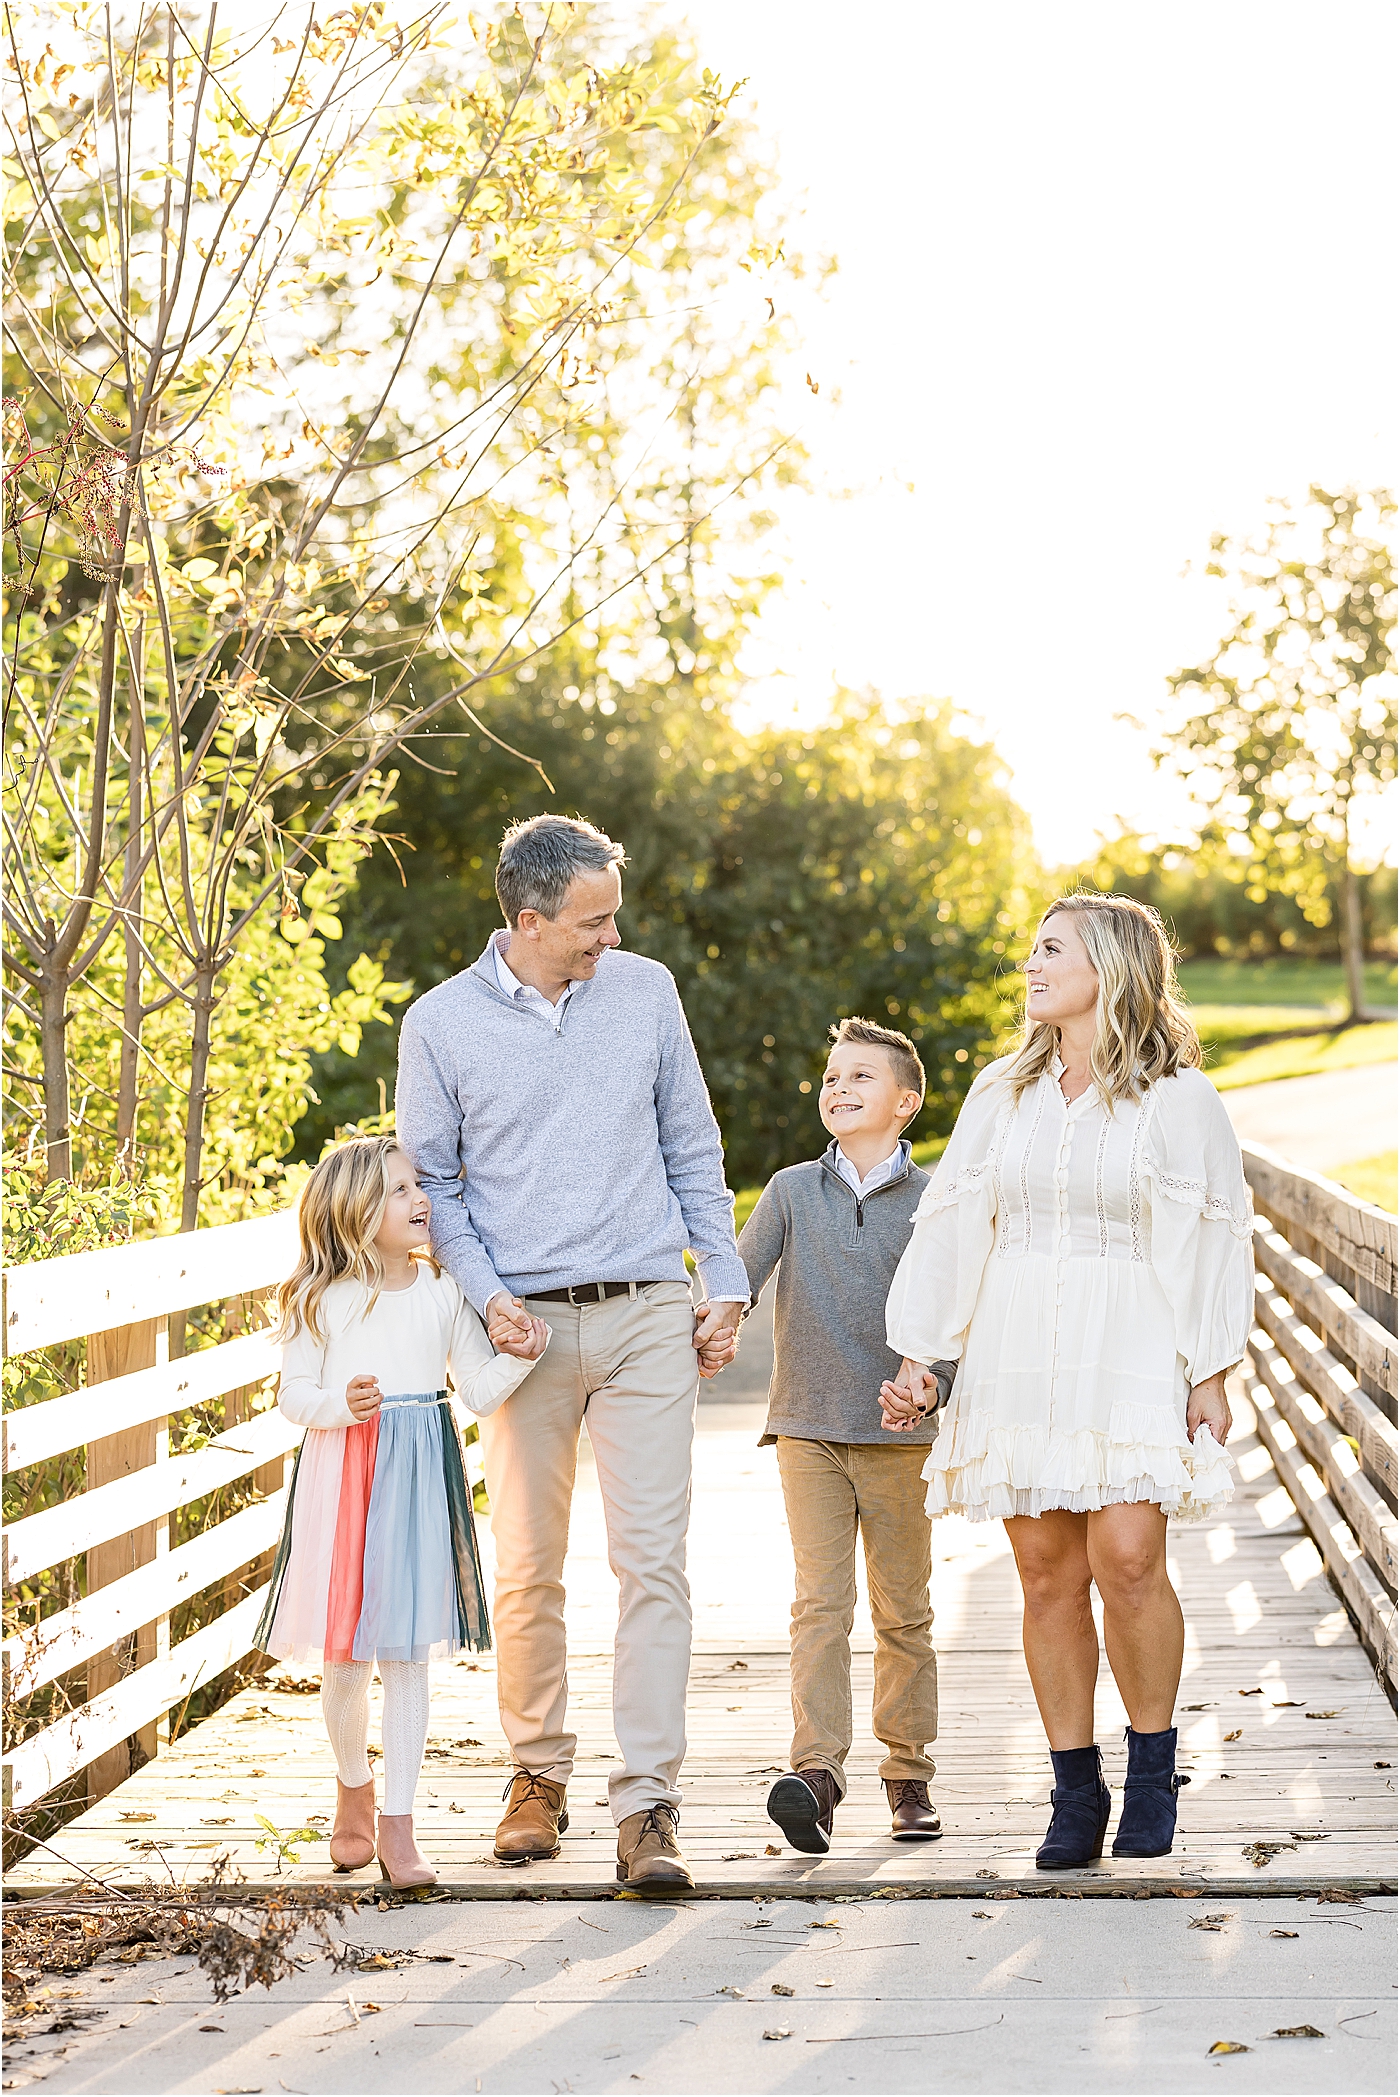 Sunset family session at the Village of West Clay with Lindsay Konopa Photography.